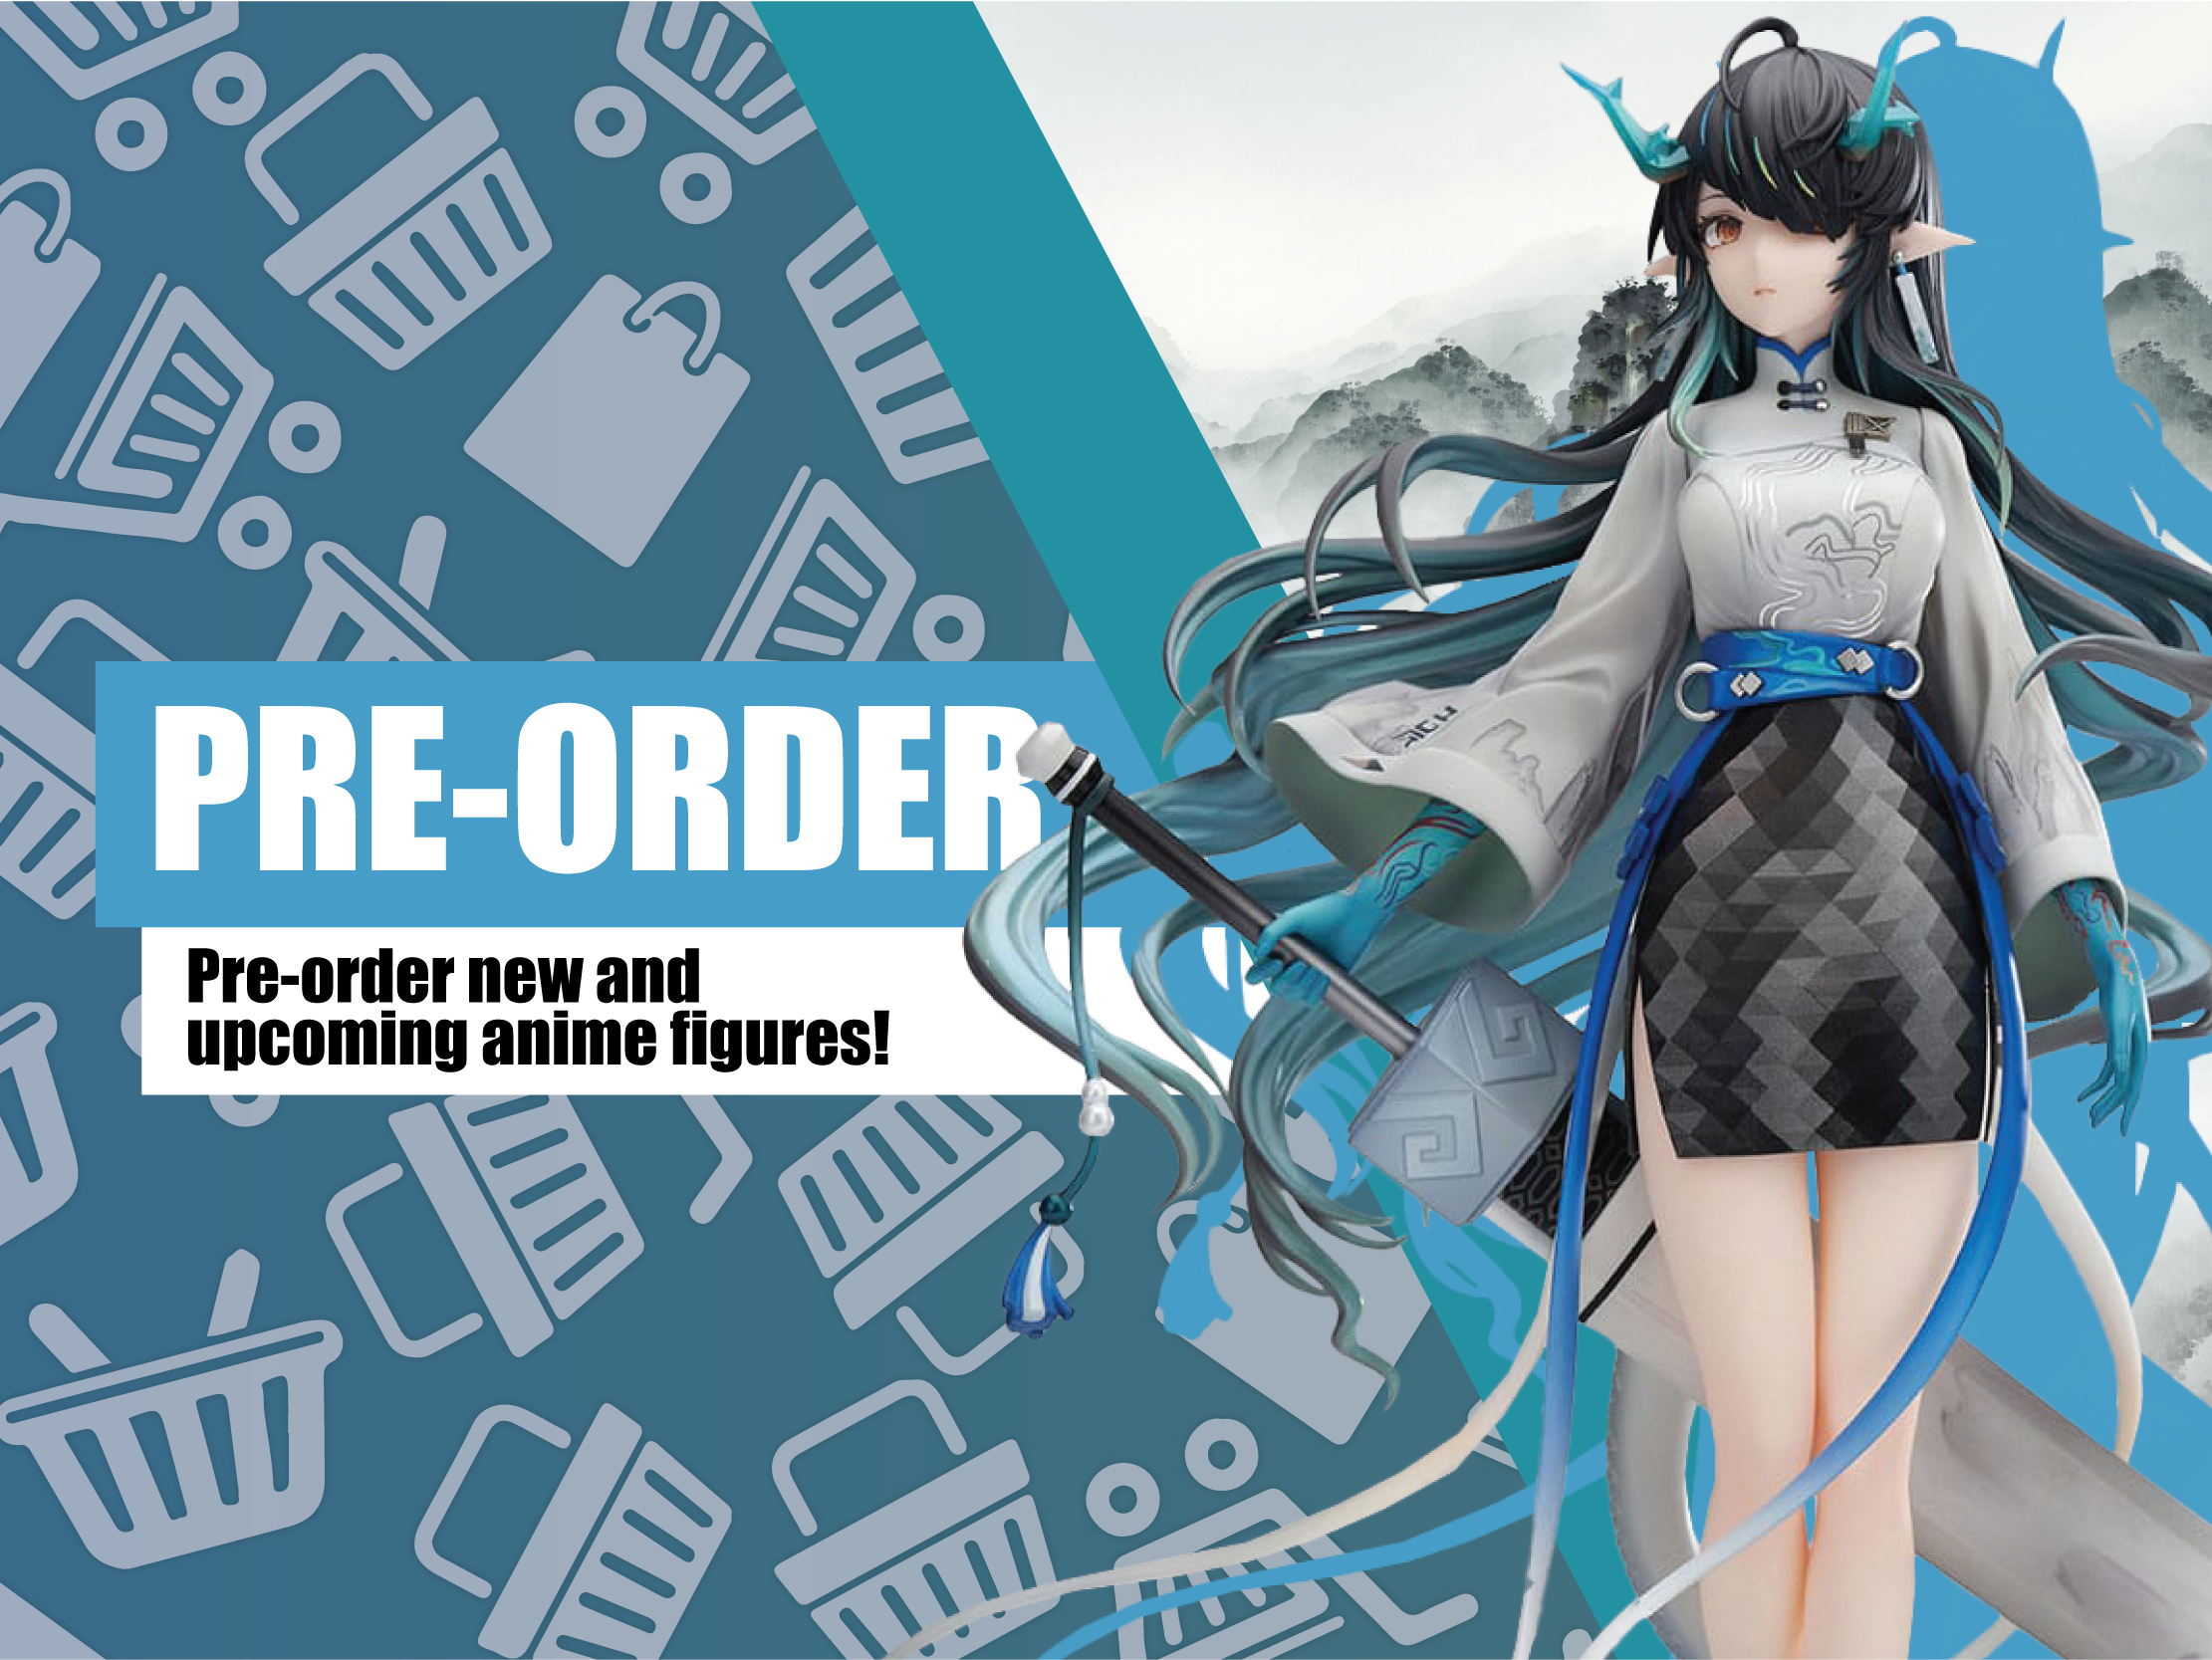 The Best Suppliers for Your Anime Figure Online Store